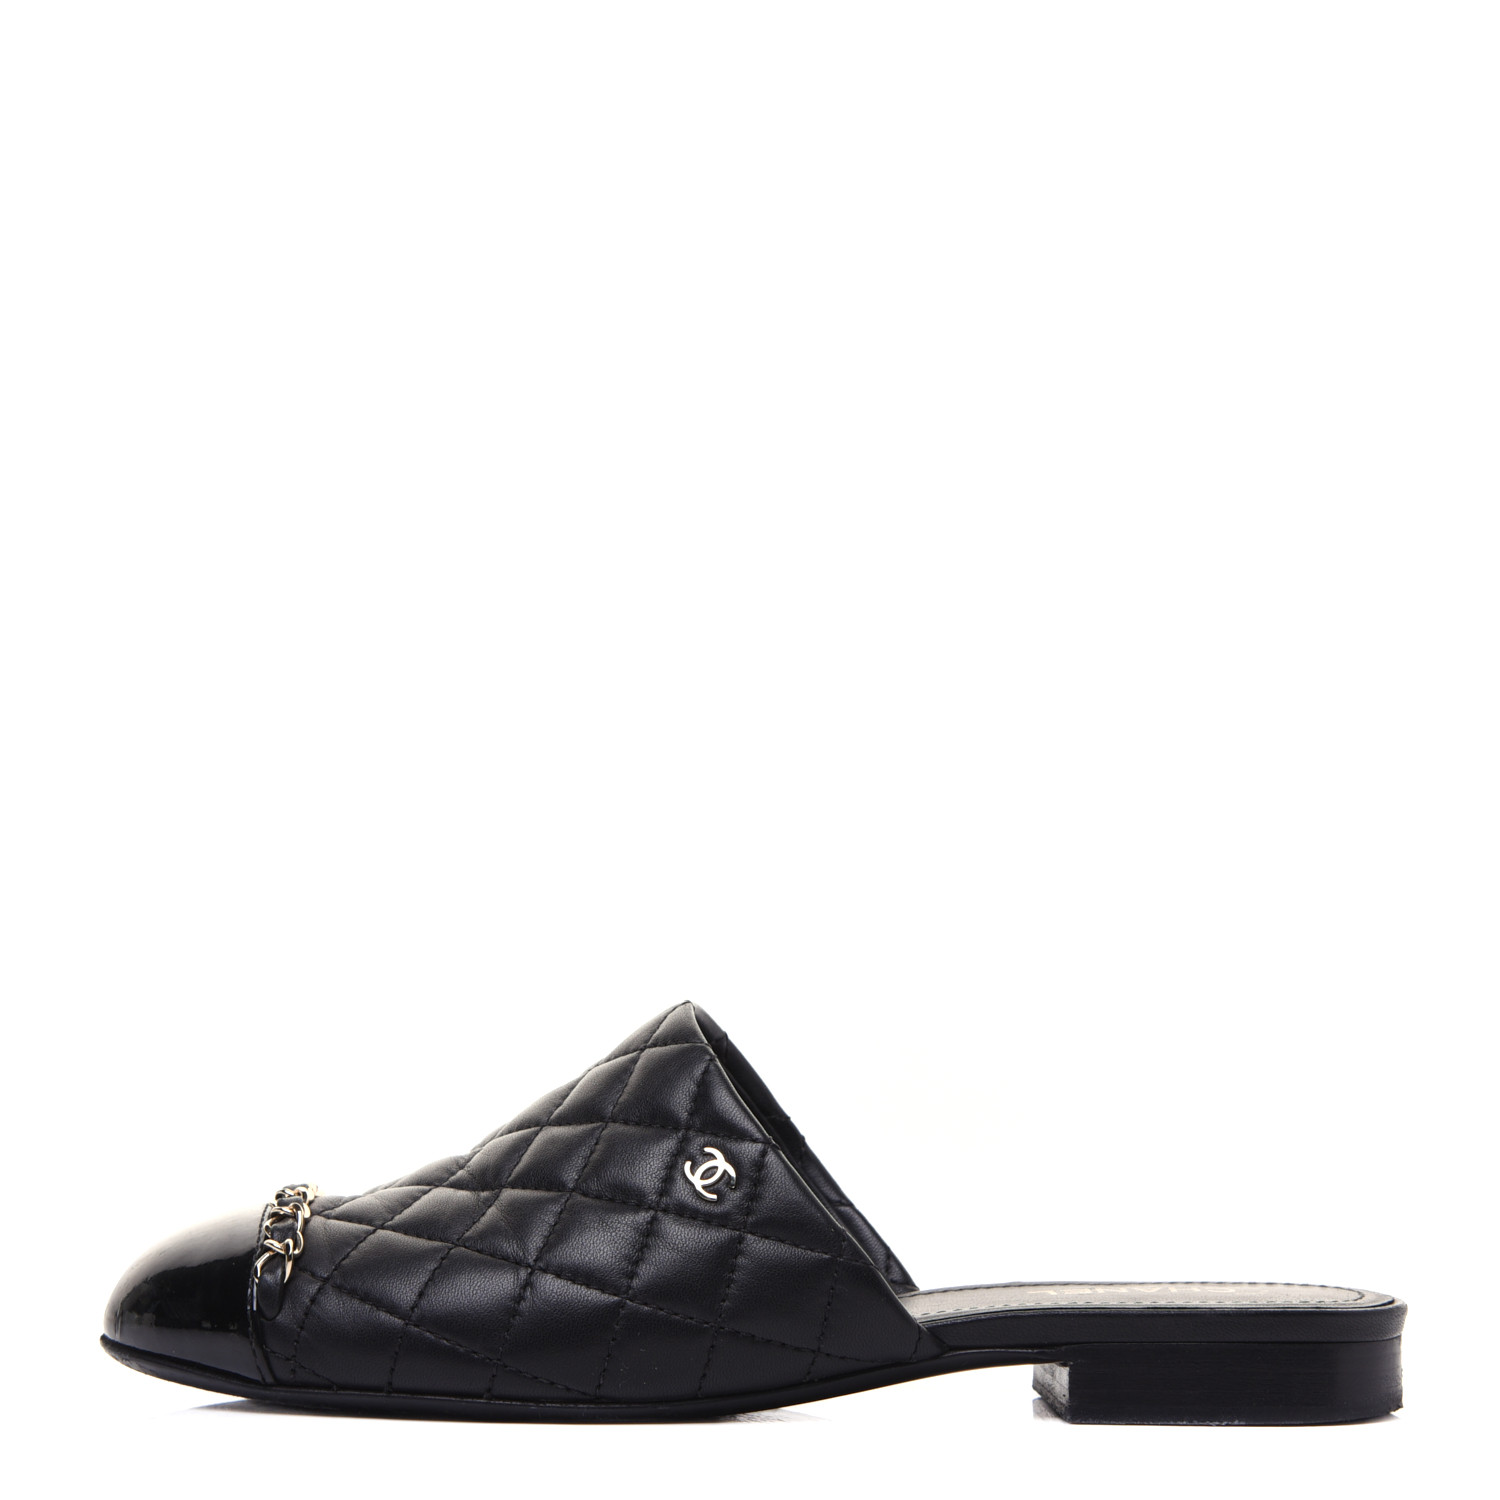 CHANEL Lambskin Patent Quilted Chain Mules 37.5 Black 711648 | FASHIONPHILE